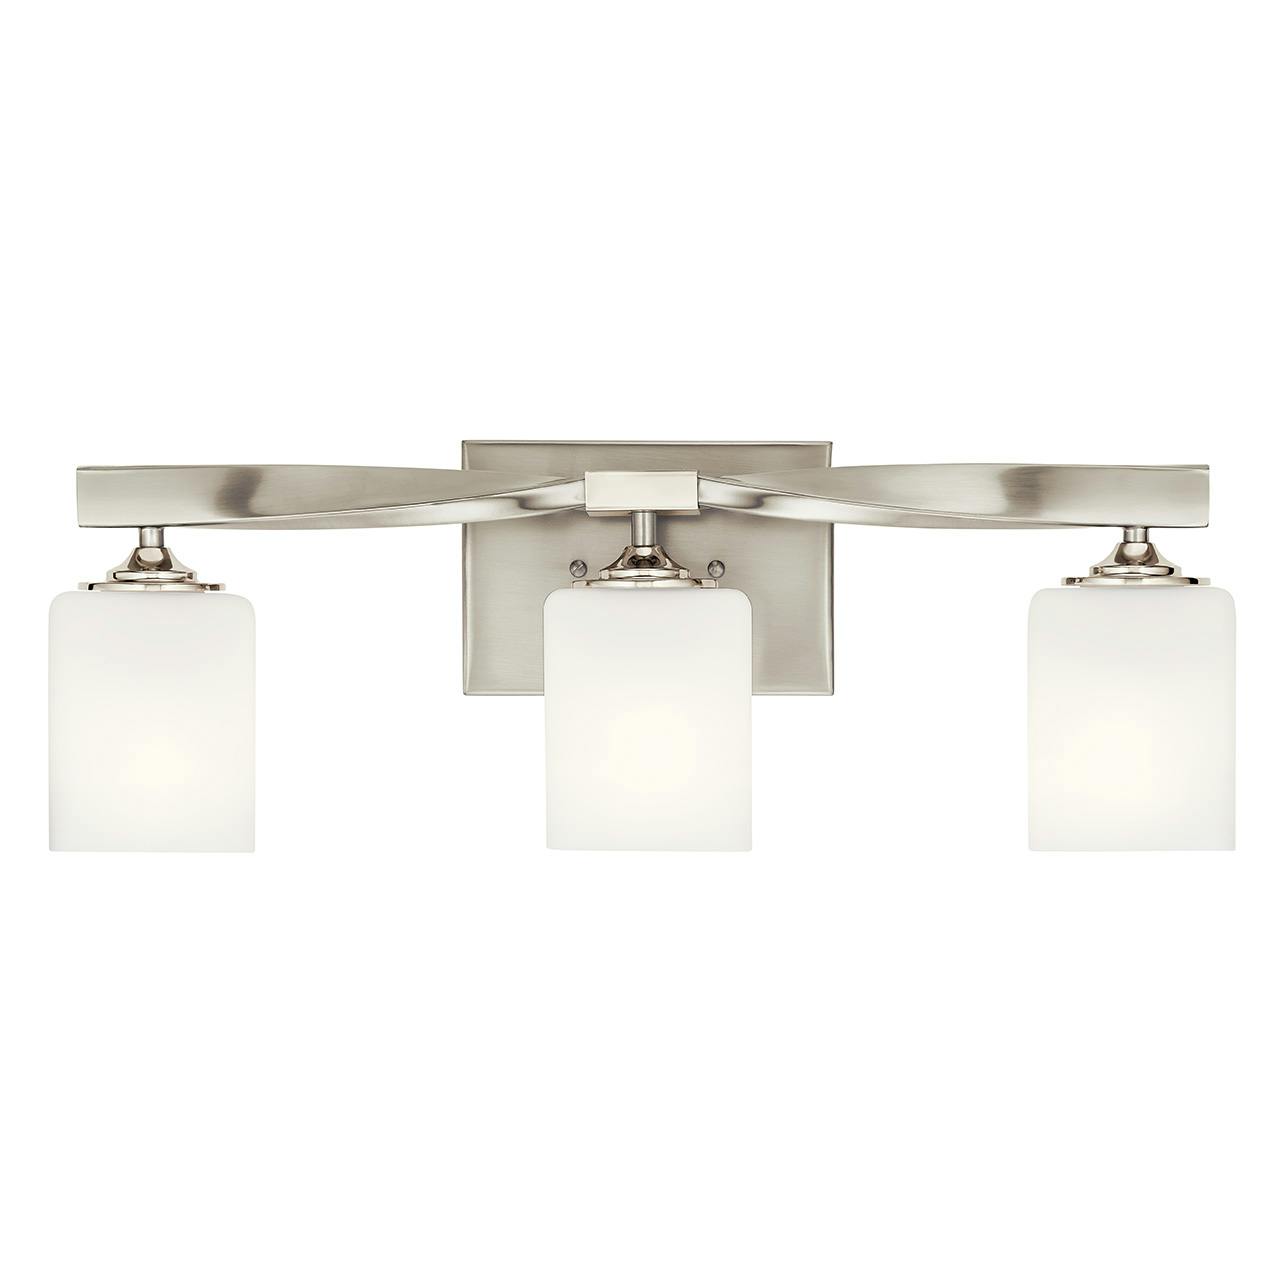 The Marette 3 Light Vanity Light Nickel facing down on a white background